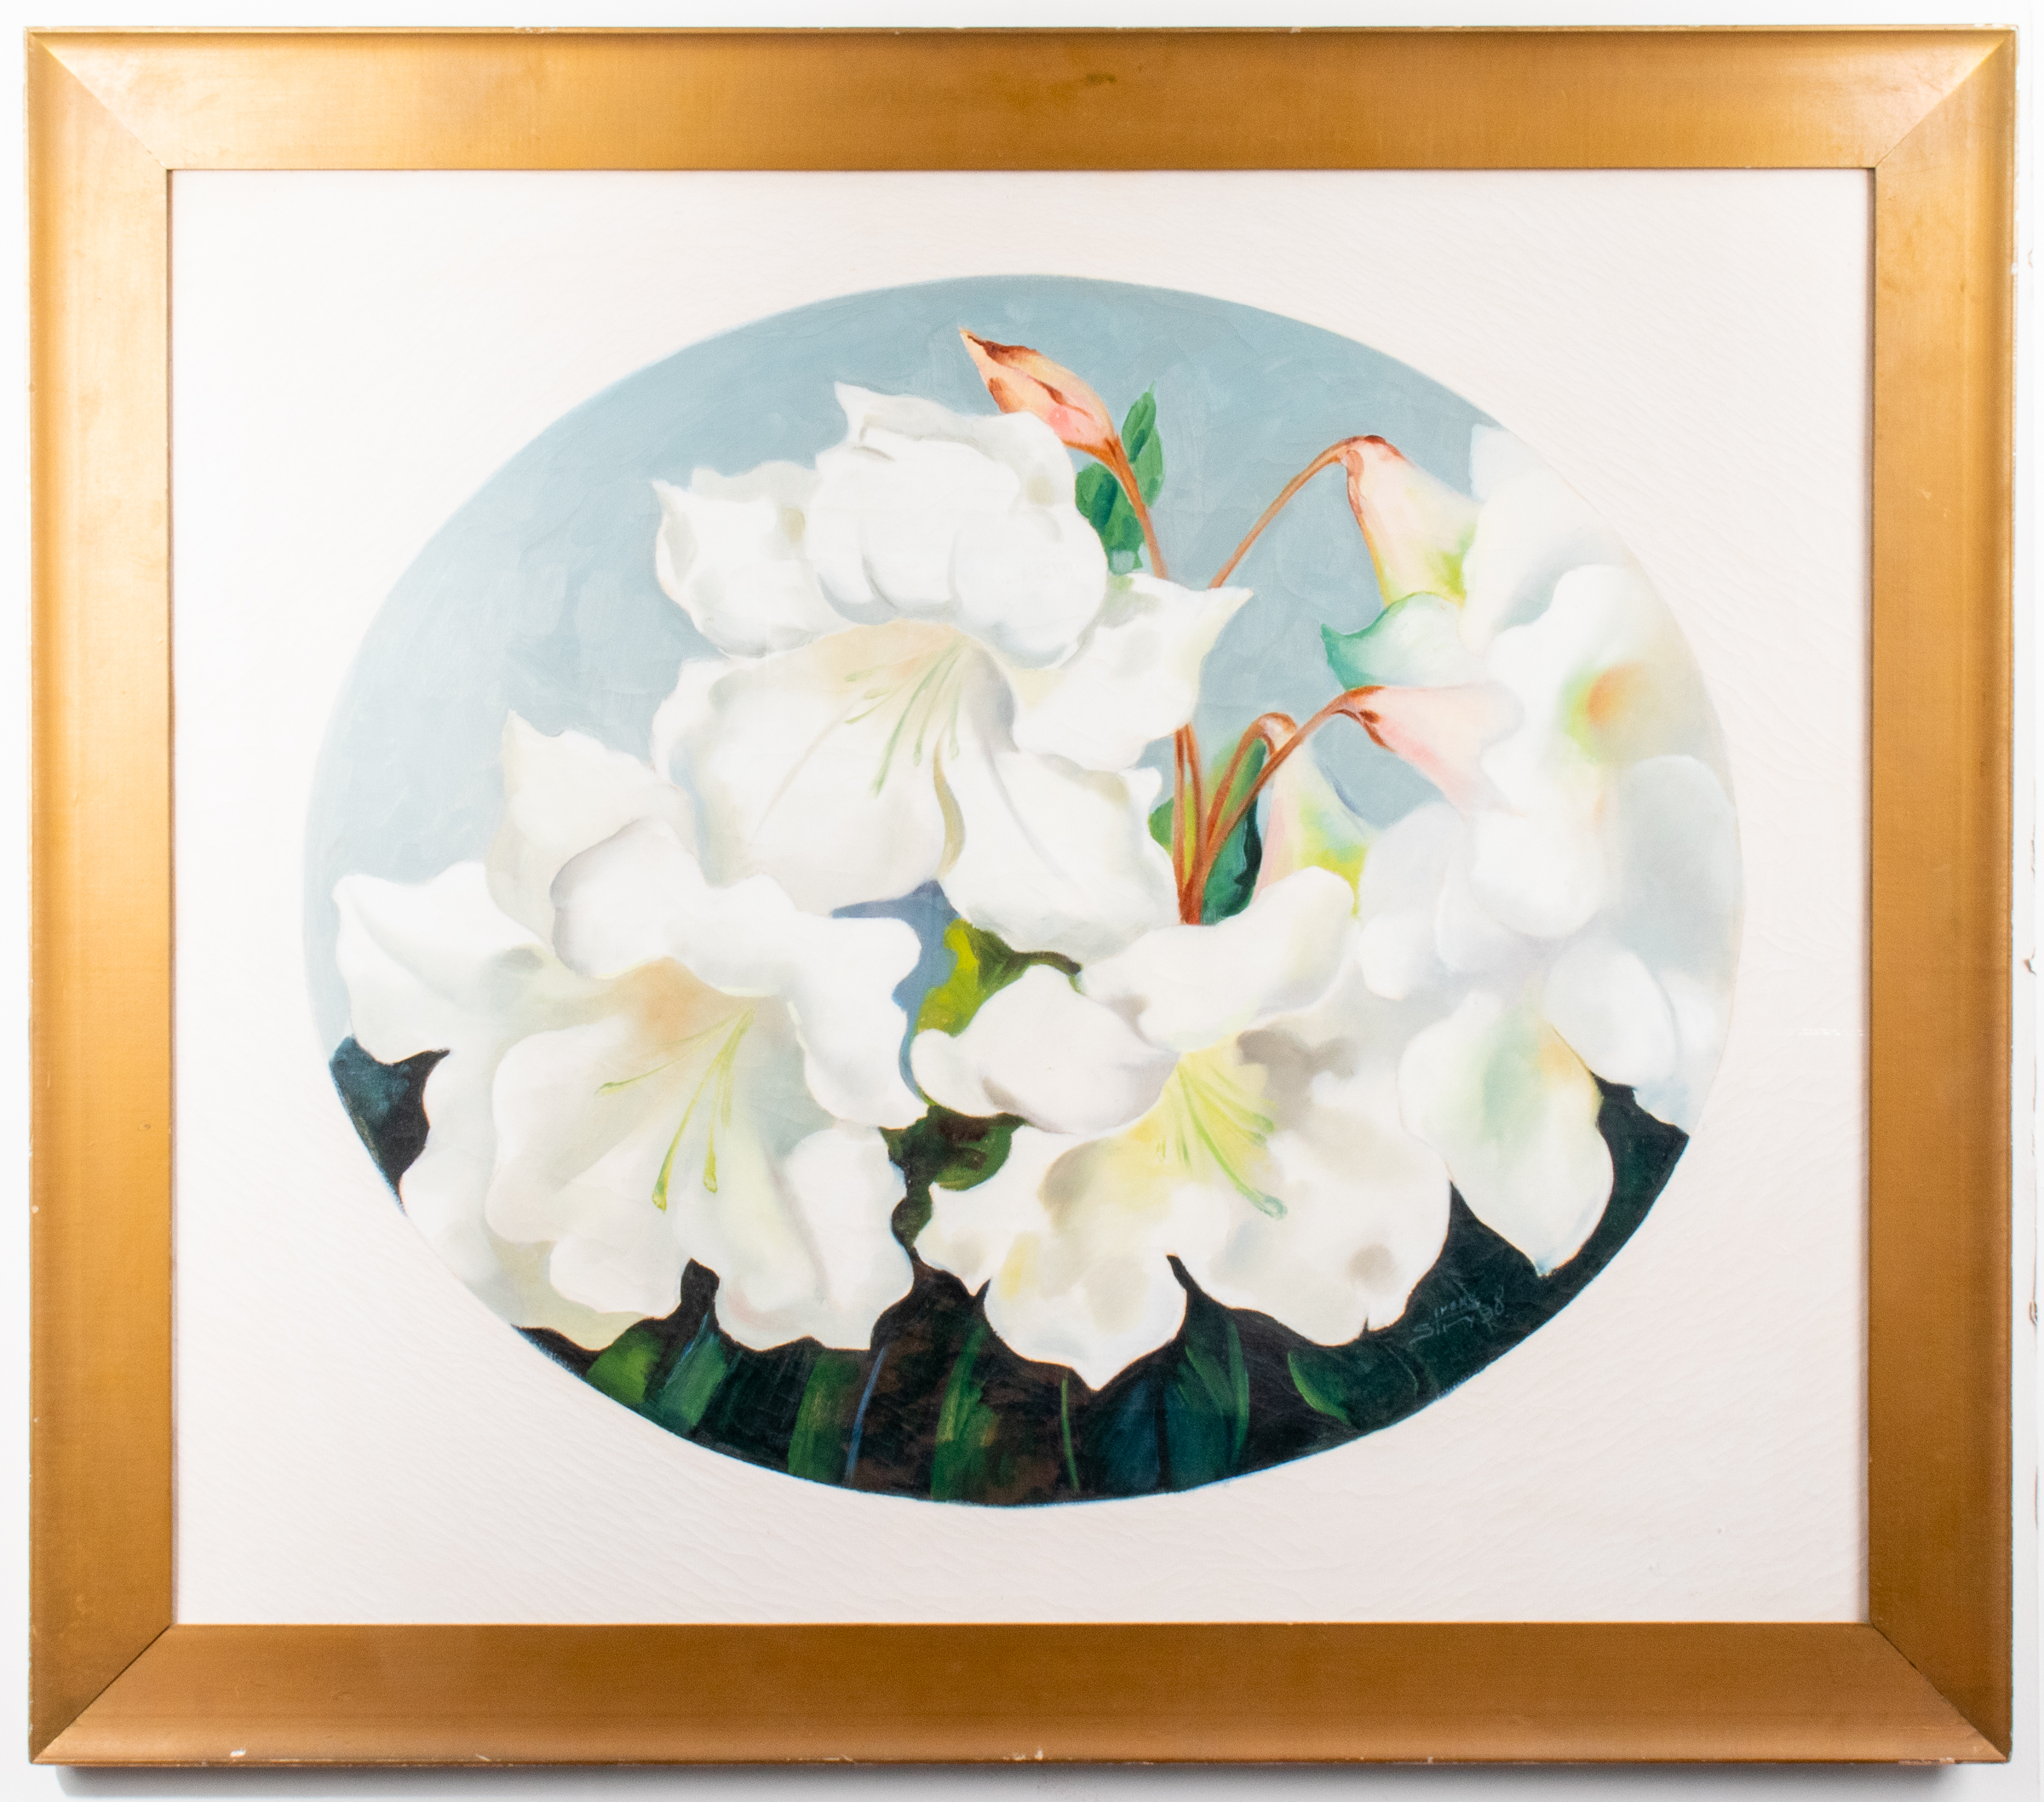 IRENE STRY MADONNA LILIES OIL 3c3985